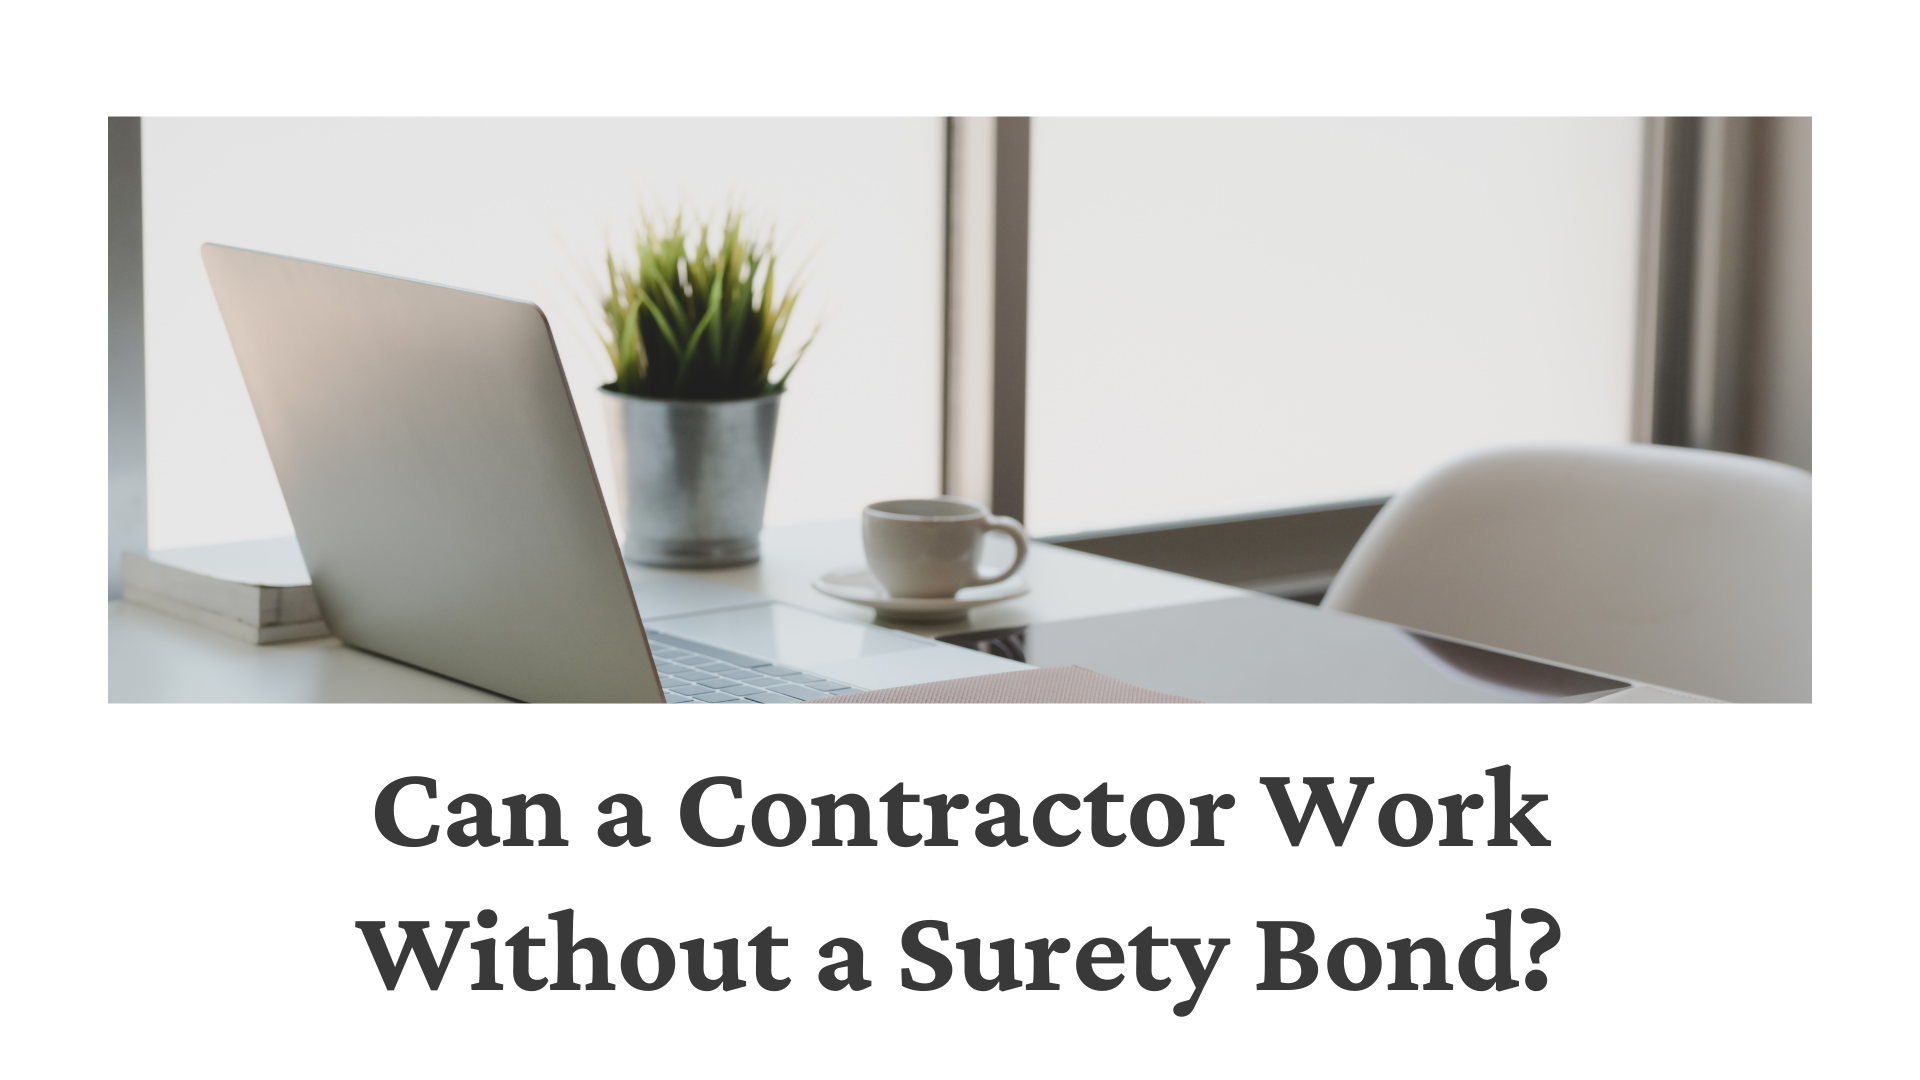 surety bond - Why is it necessary for contractors to be bonded